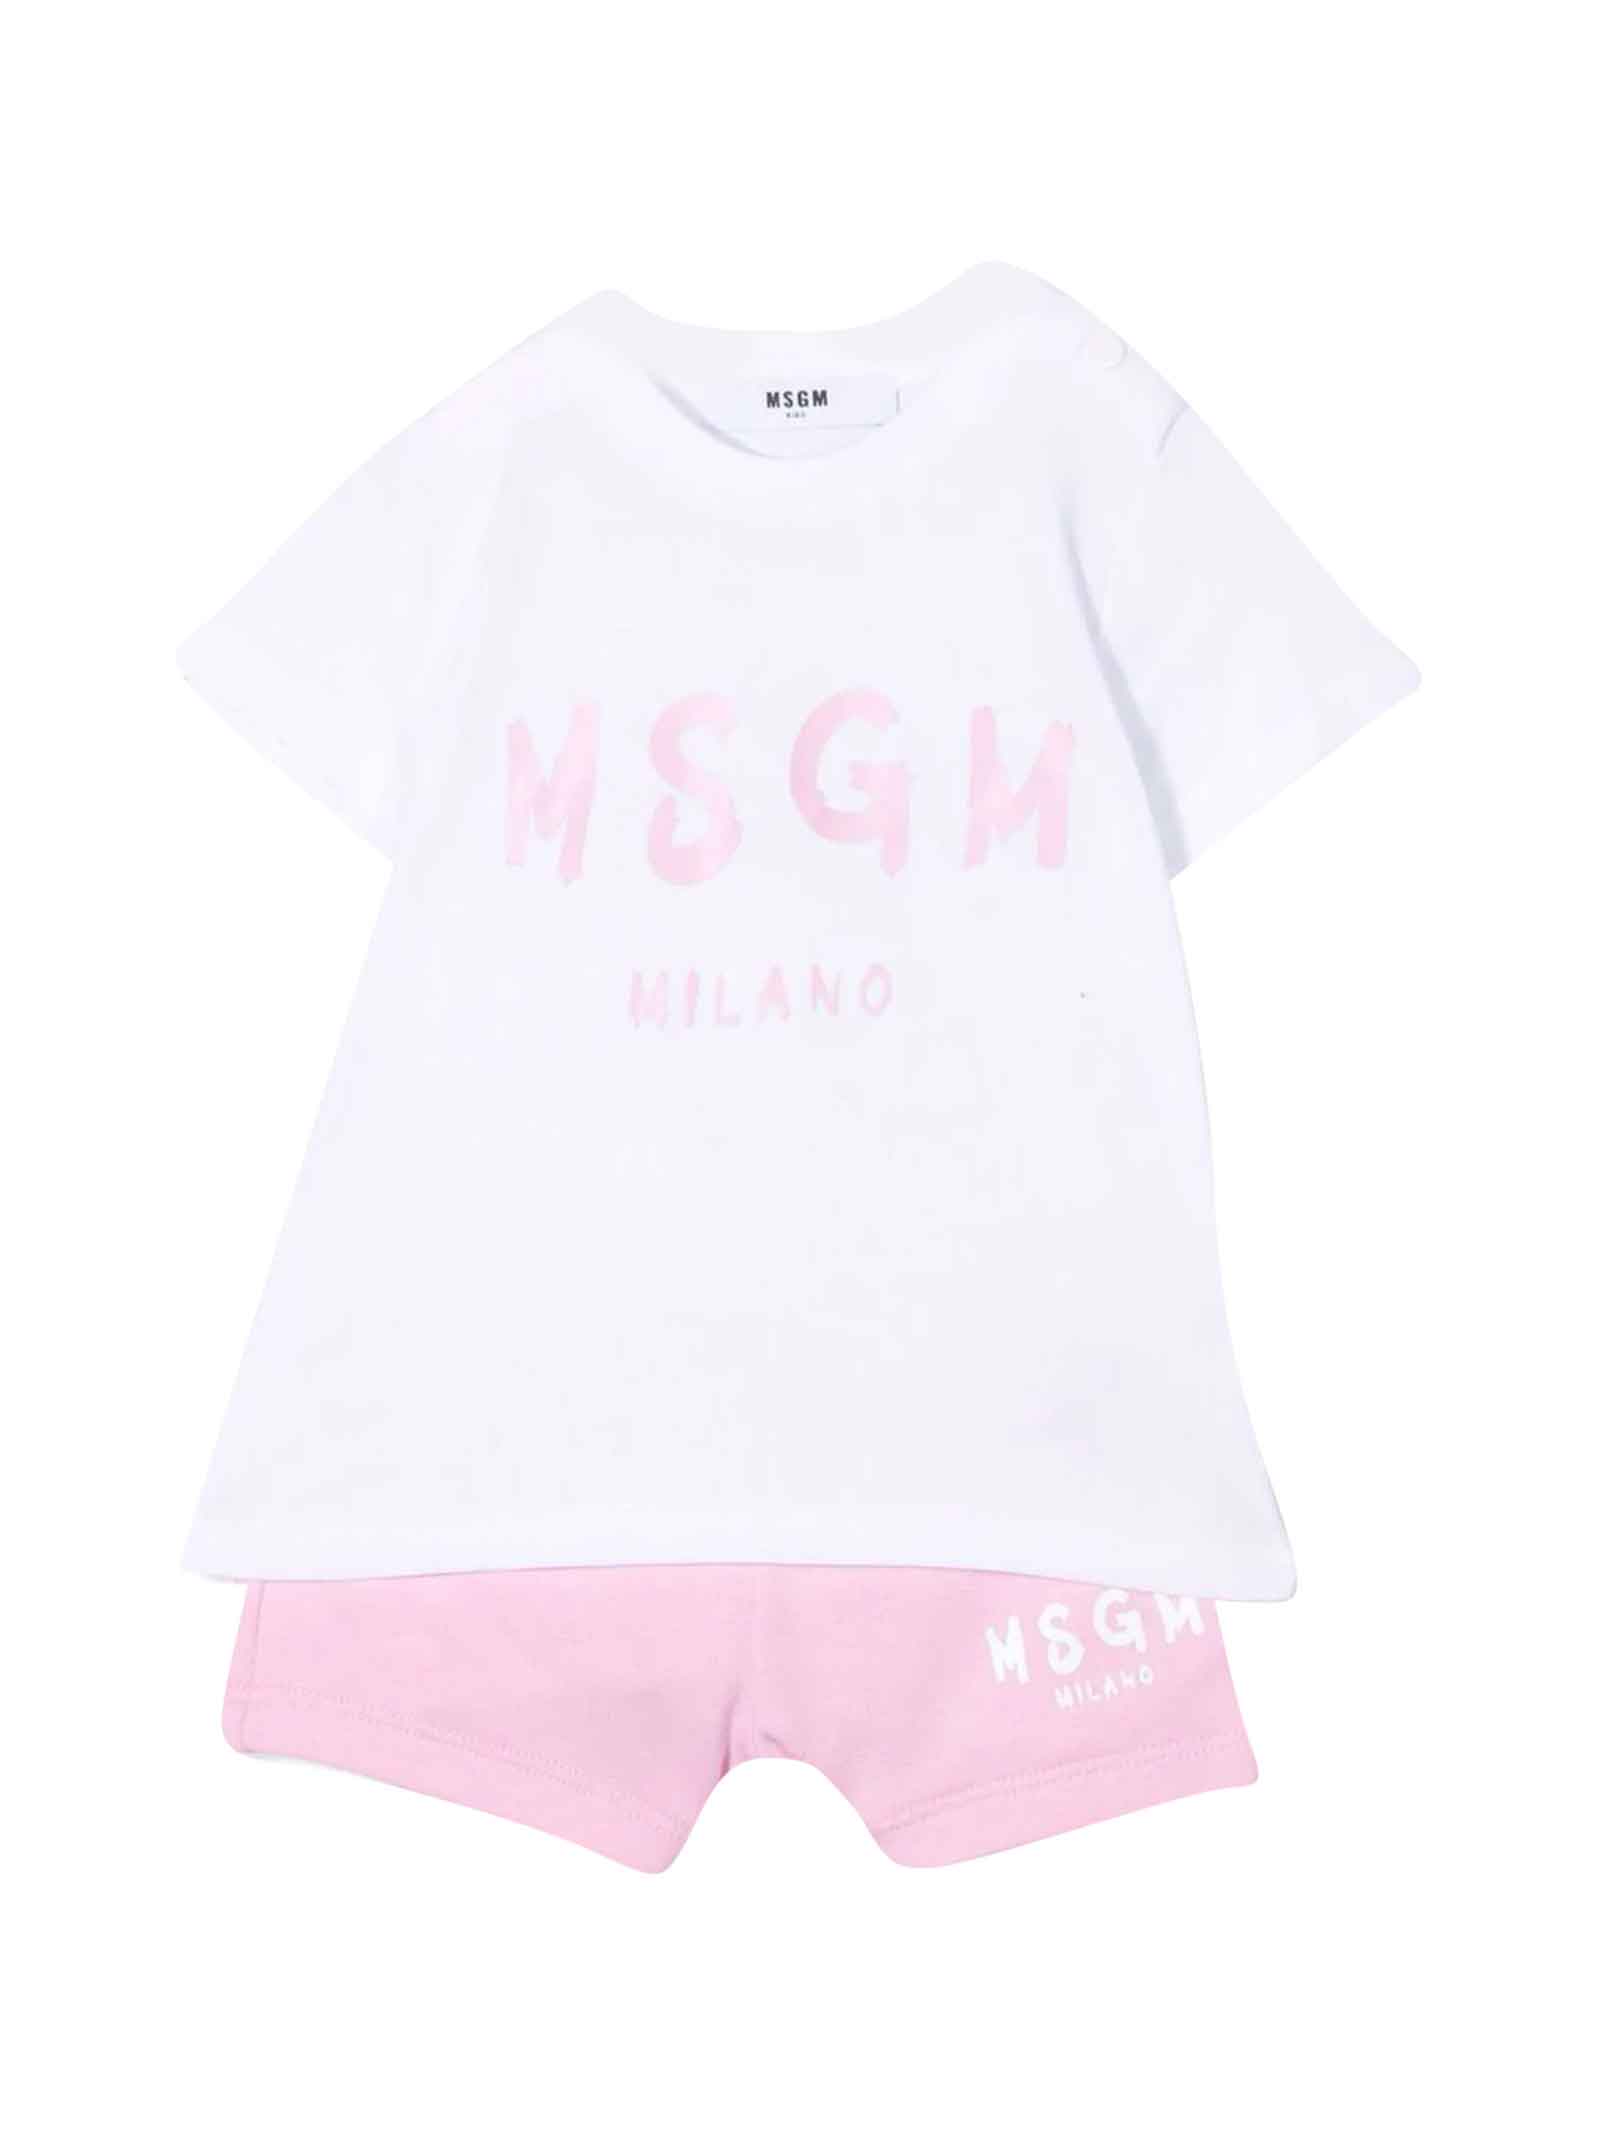 MSGM White / Pink Suit Baby Girl